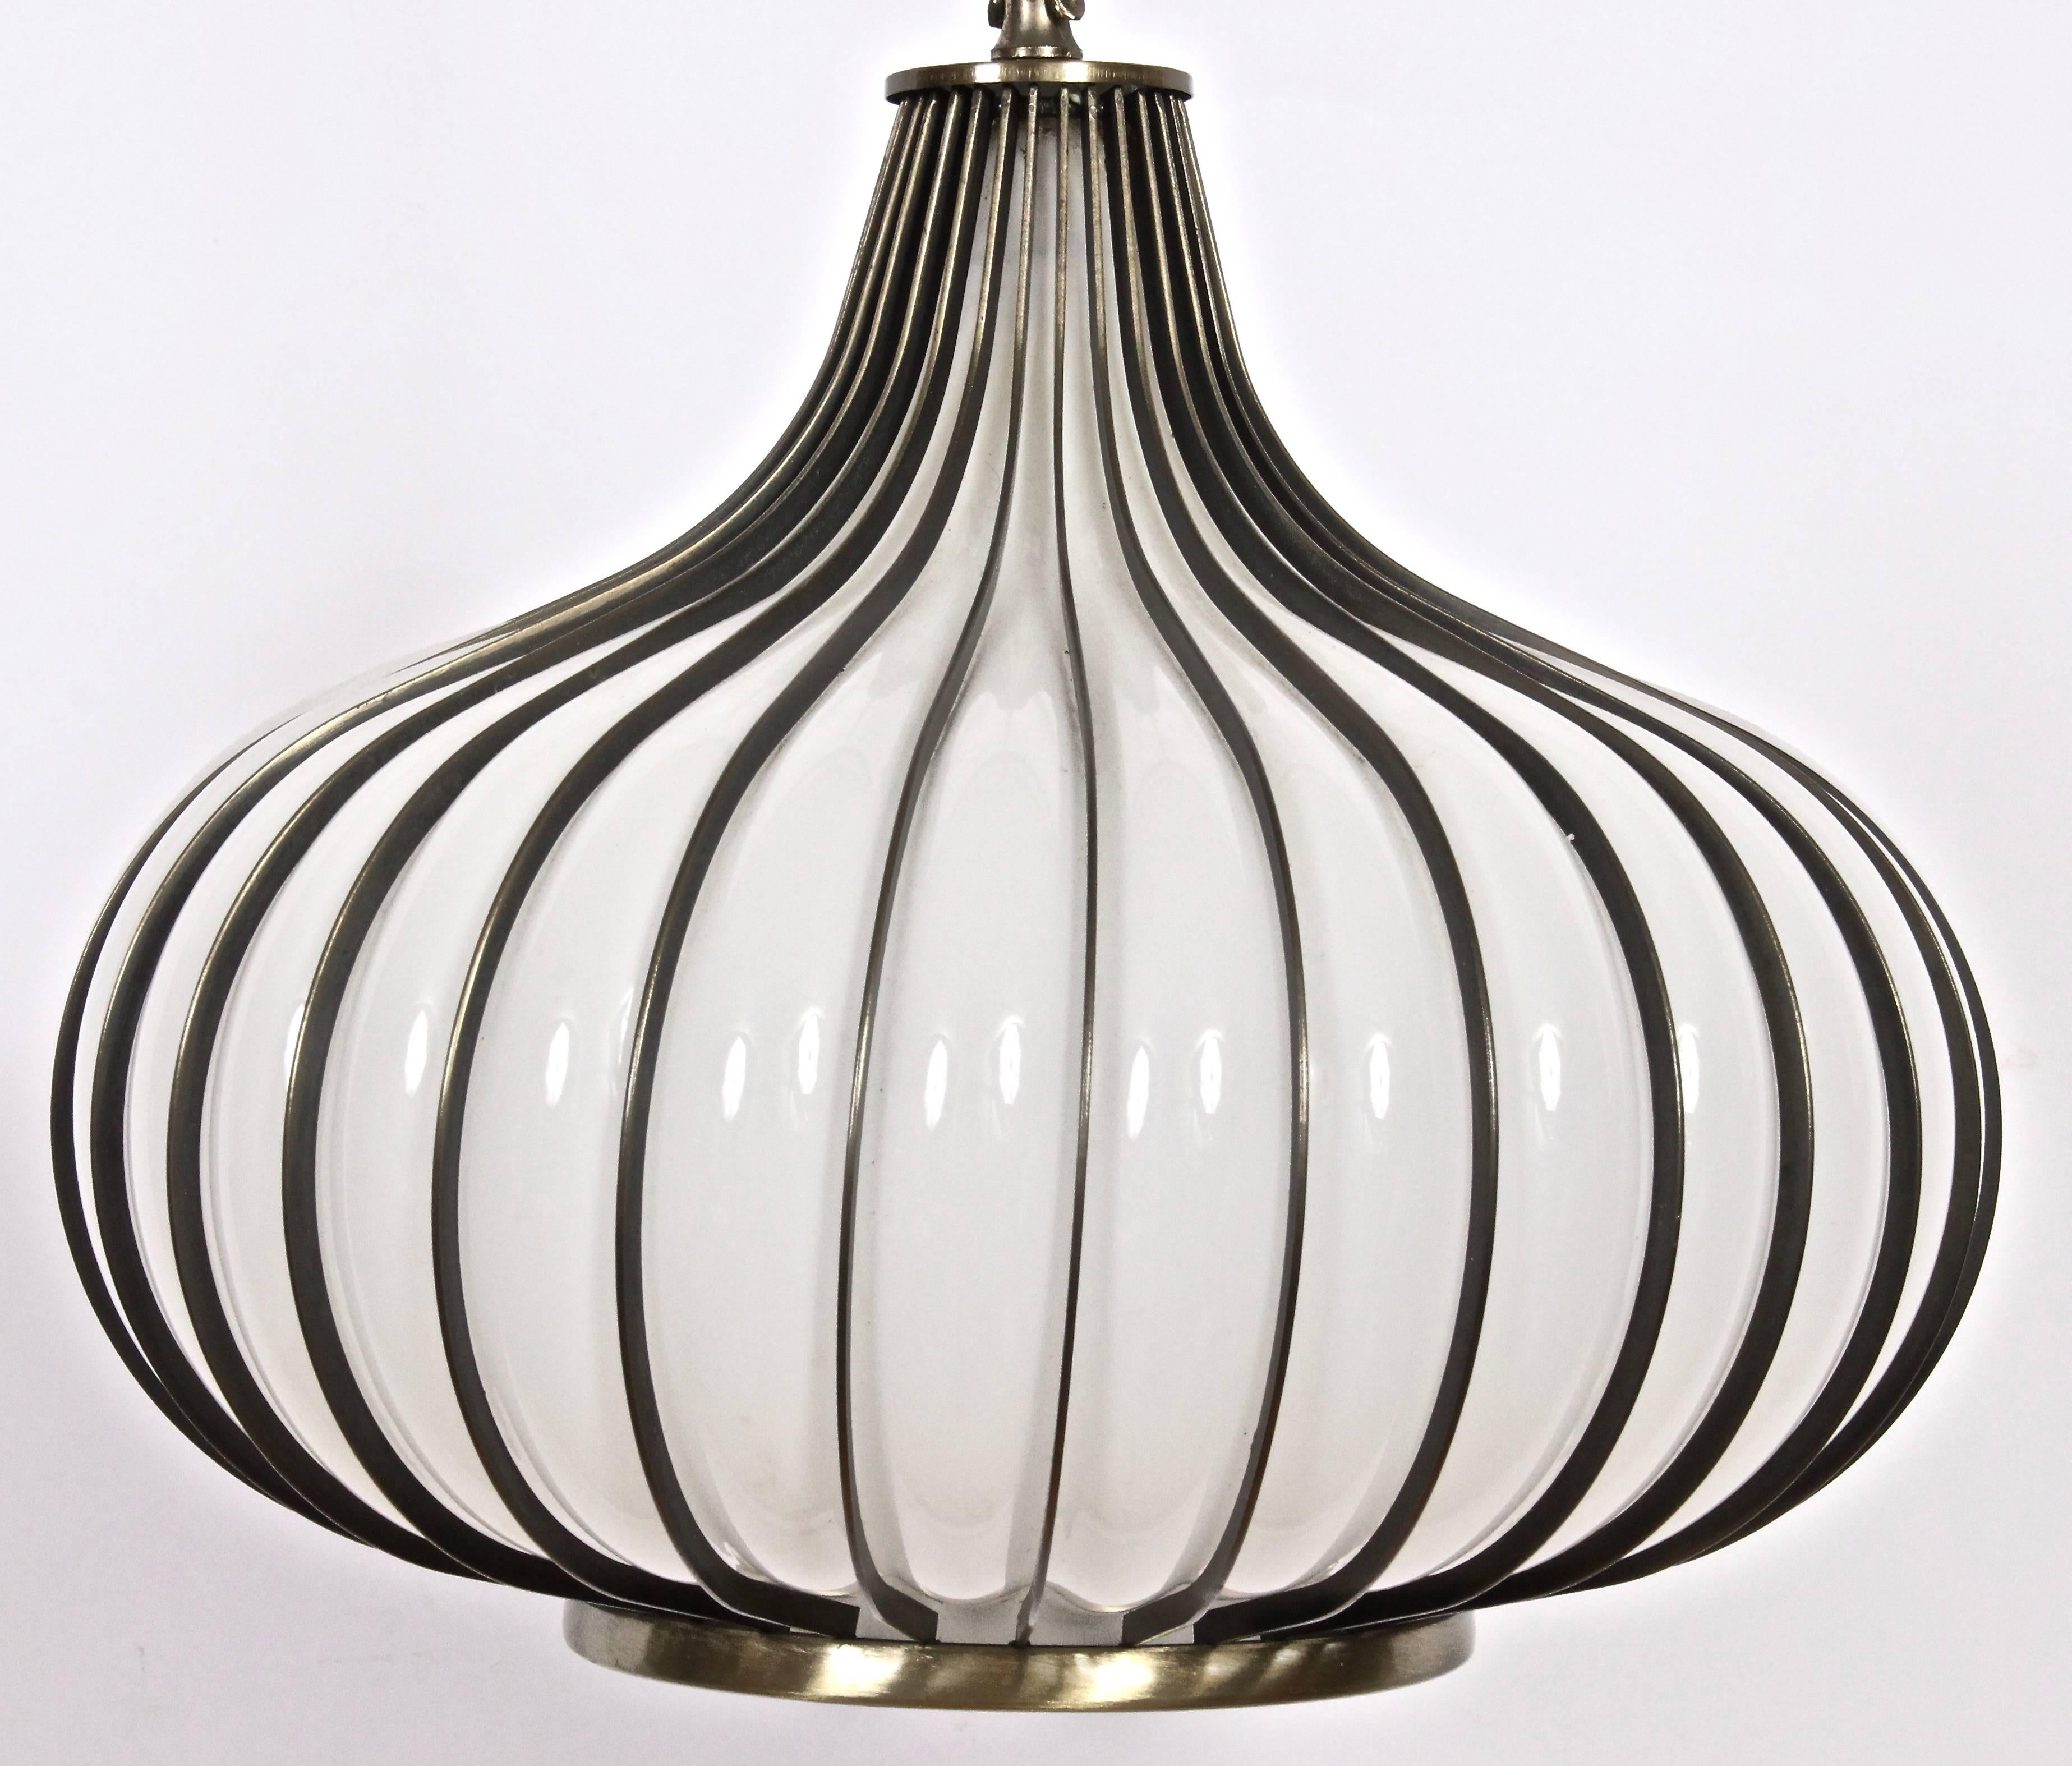 California Modern translucent White Glass Hanging Onion Pendant with Brass surround. Featuring a hand blown White glass Garlic bulb form with ribbed Brass plated Steel detail. With Brass plated 14 foot length chain and 16 foot length clear nylon